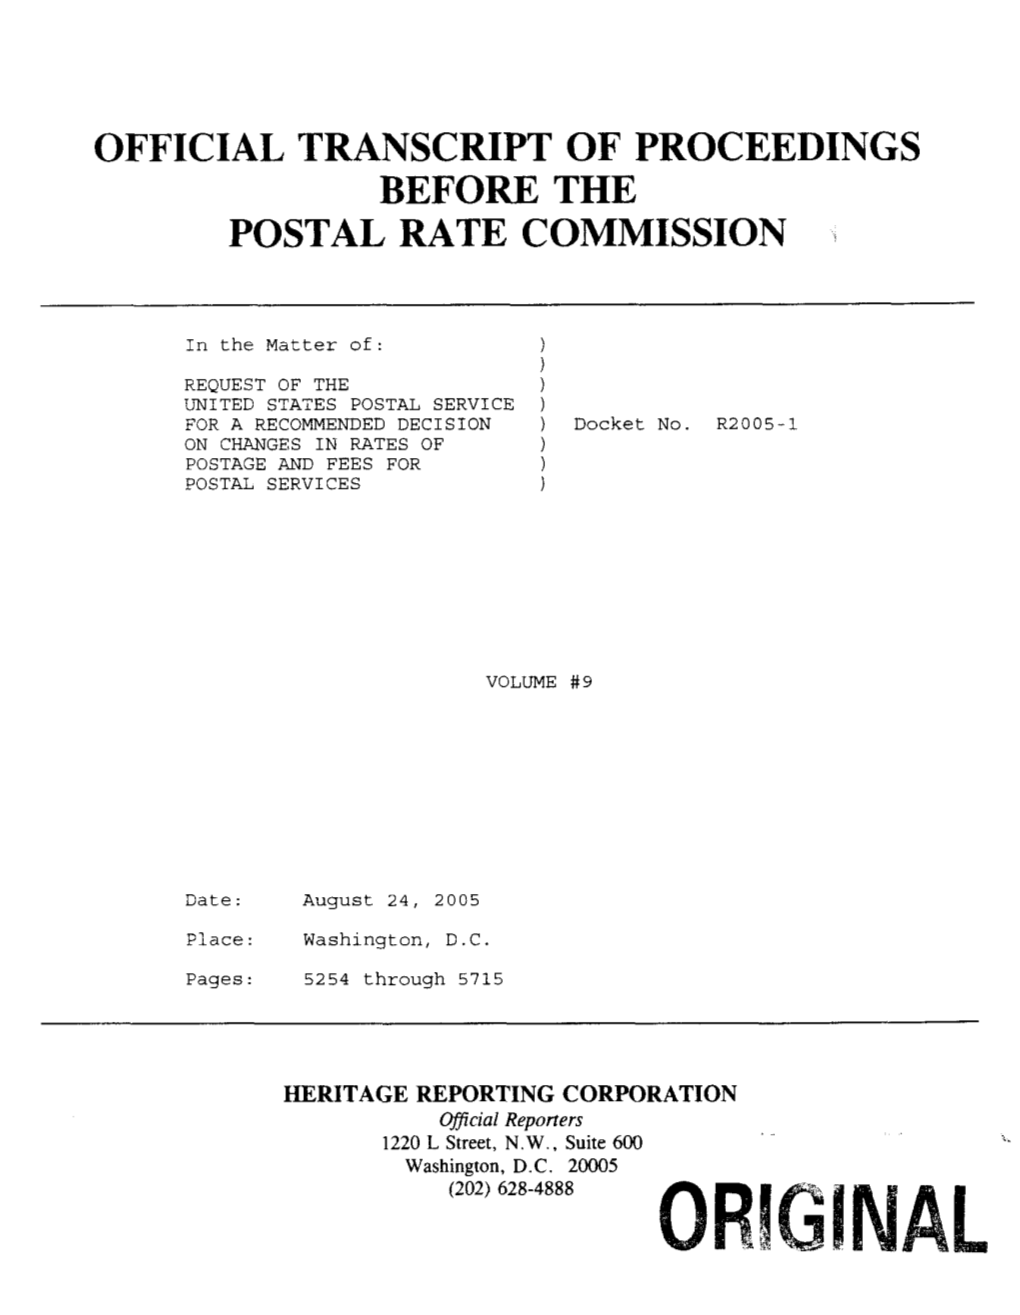 Official Transcript of Proceedings Before the Postal Rate Commission